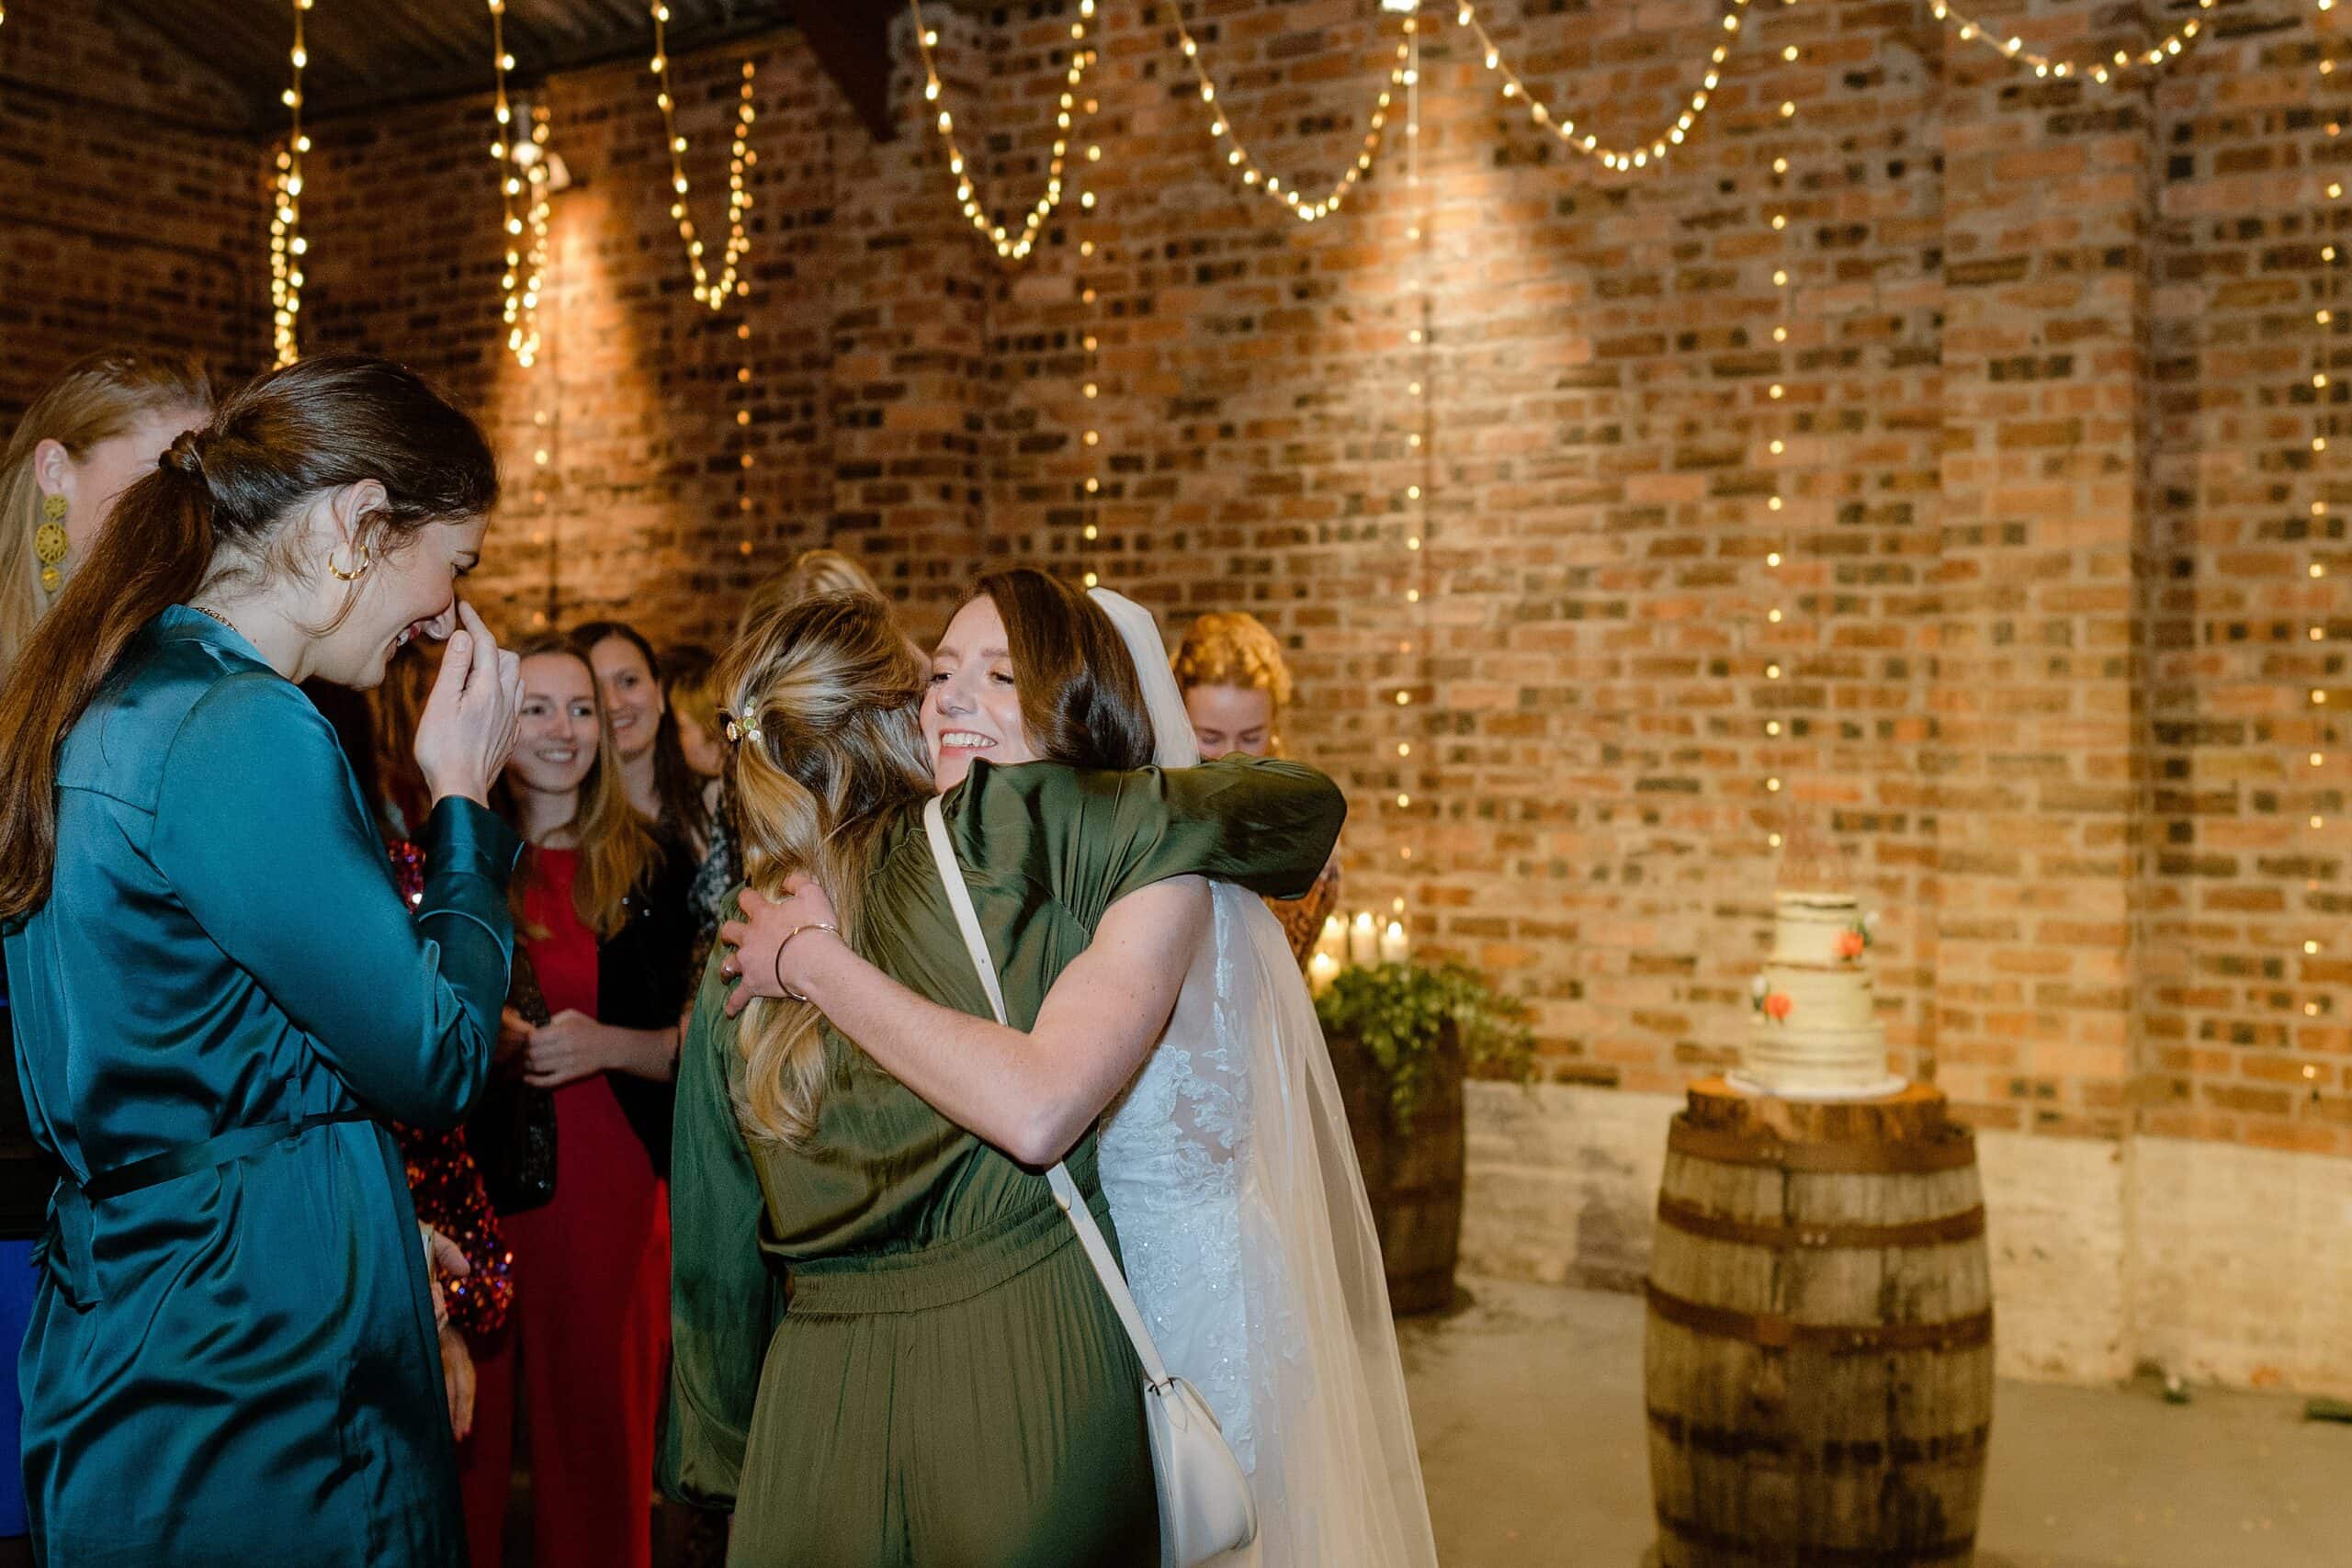 st andrews wedding photographer captures inside interior view of a barn wedding venue in scotland showing the bride hugging a guest following her wedding ceremony with the wedding cake sitting on an oak barrel and festoon lights behind